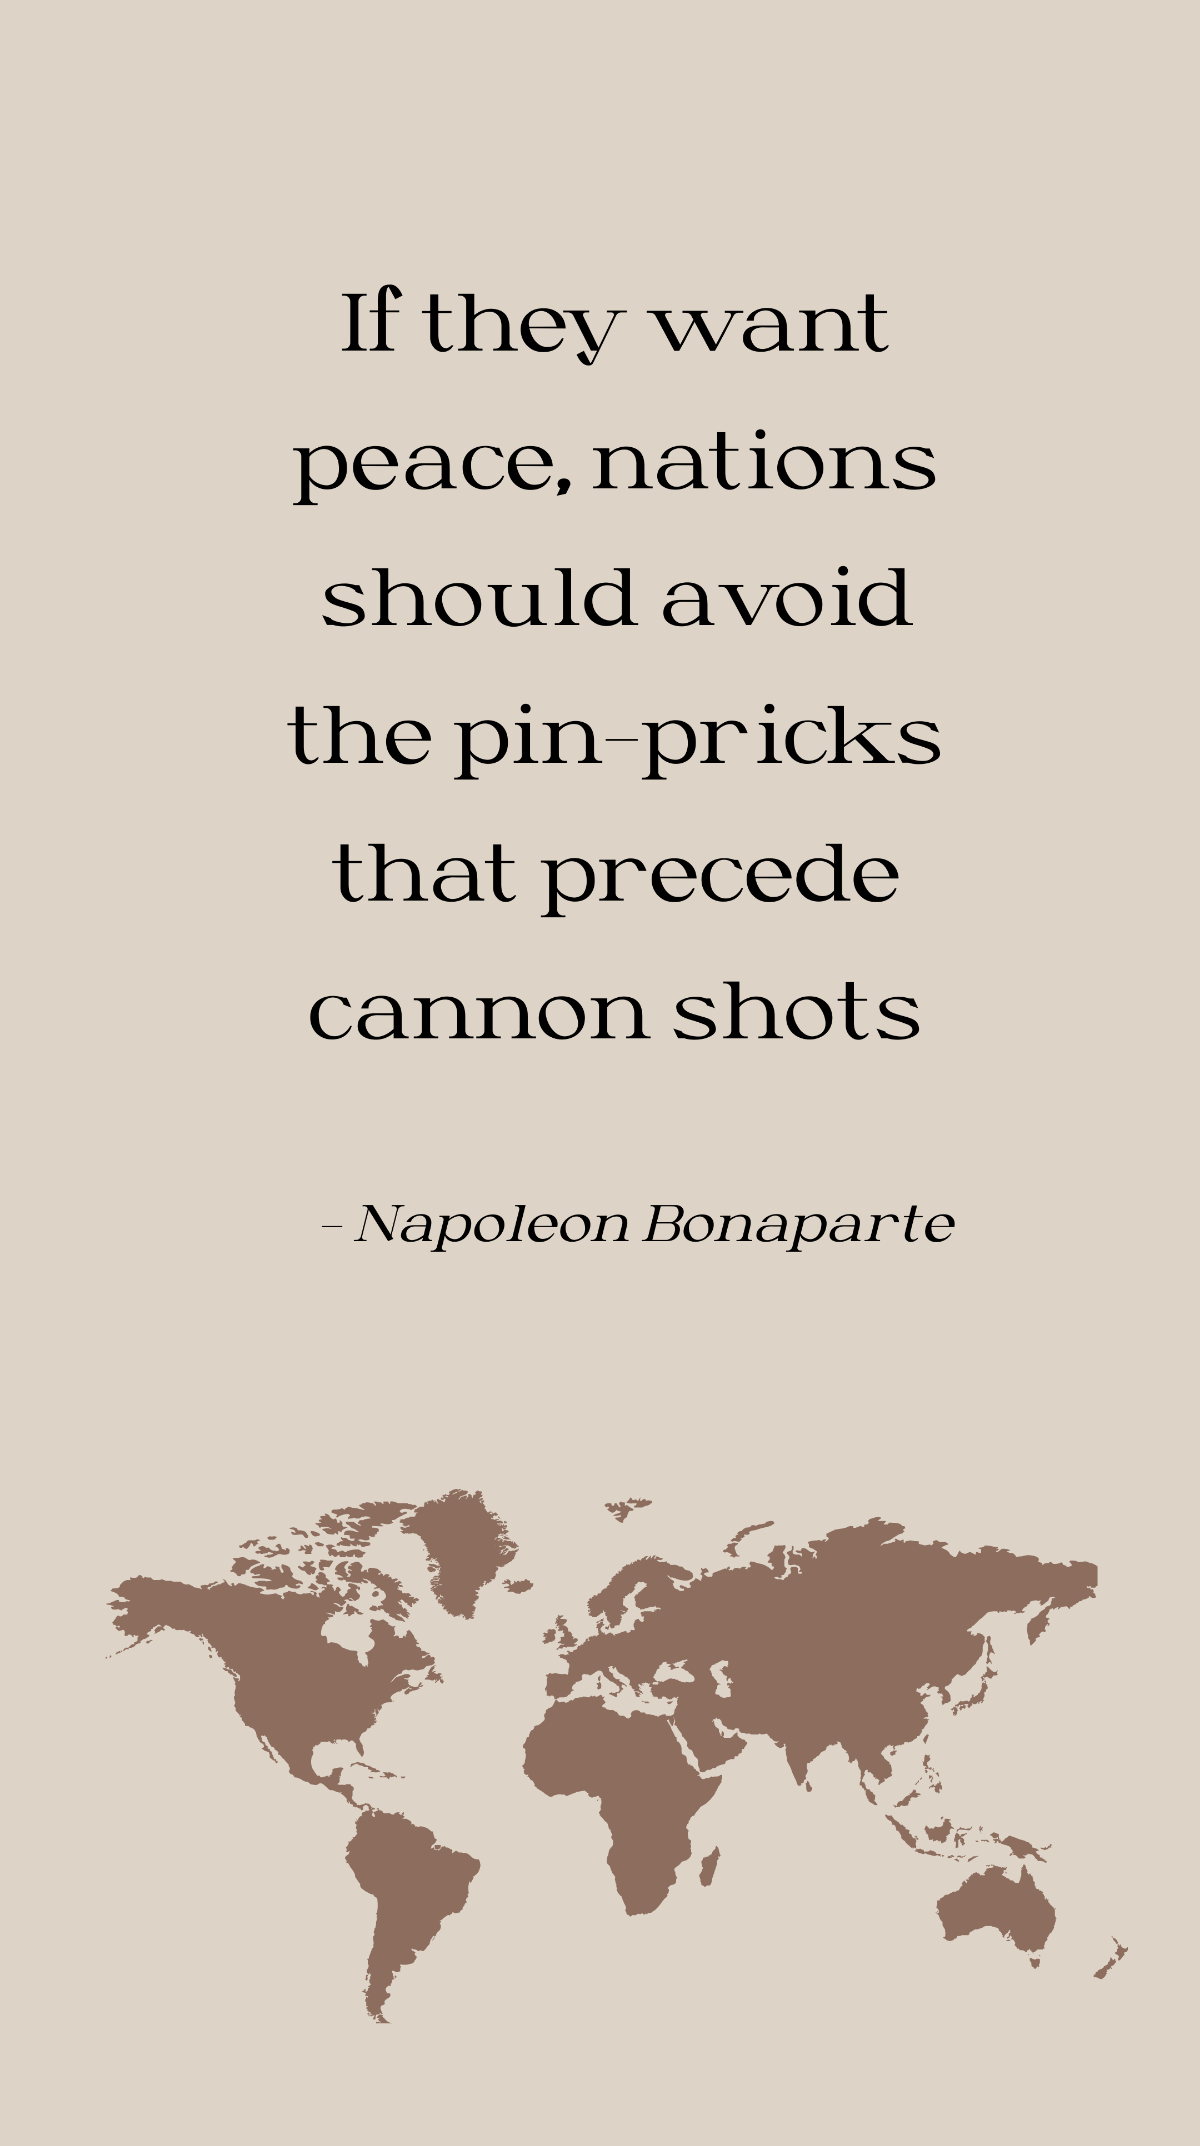 Napoleon Bonaparte - If they want peace, nations should avoid the pin-pricks that precede cannon shots Template